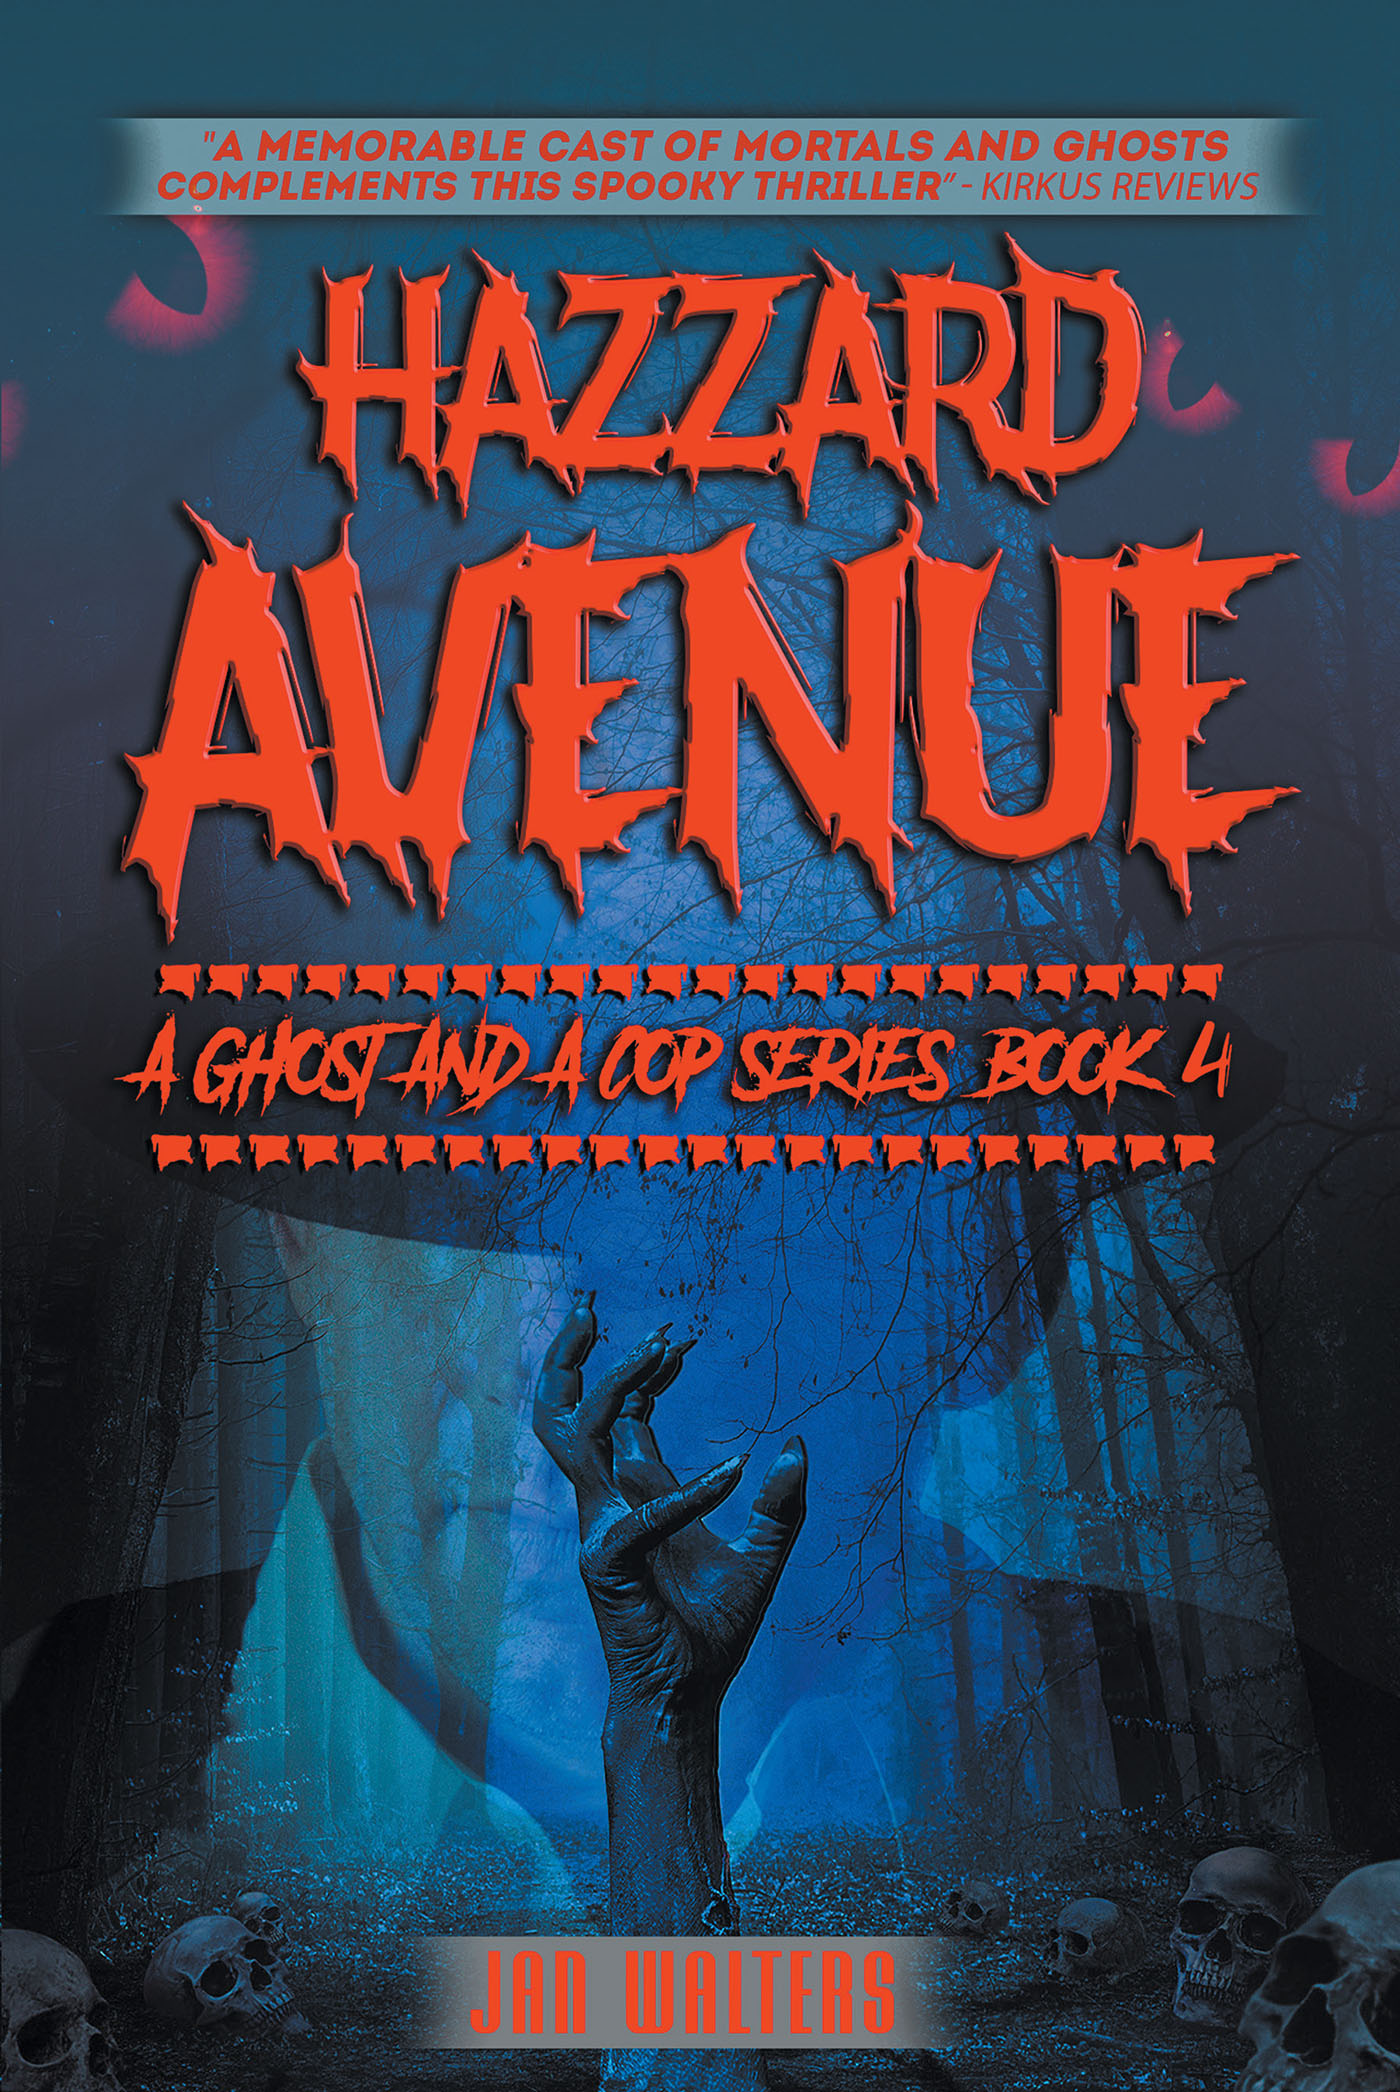 Jan Walters’s New Book, “Hazzard Avenue: Book 4,” is a Chilling New Installment in the Epic “A Ghost and A Cop” Series That Pushes the Characters Further Than Ever Before